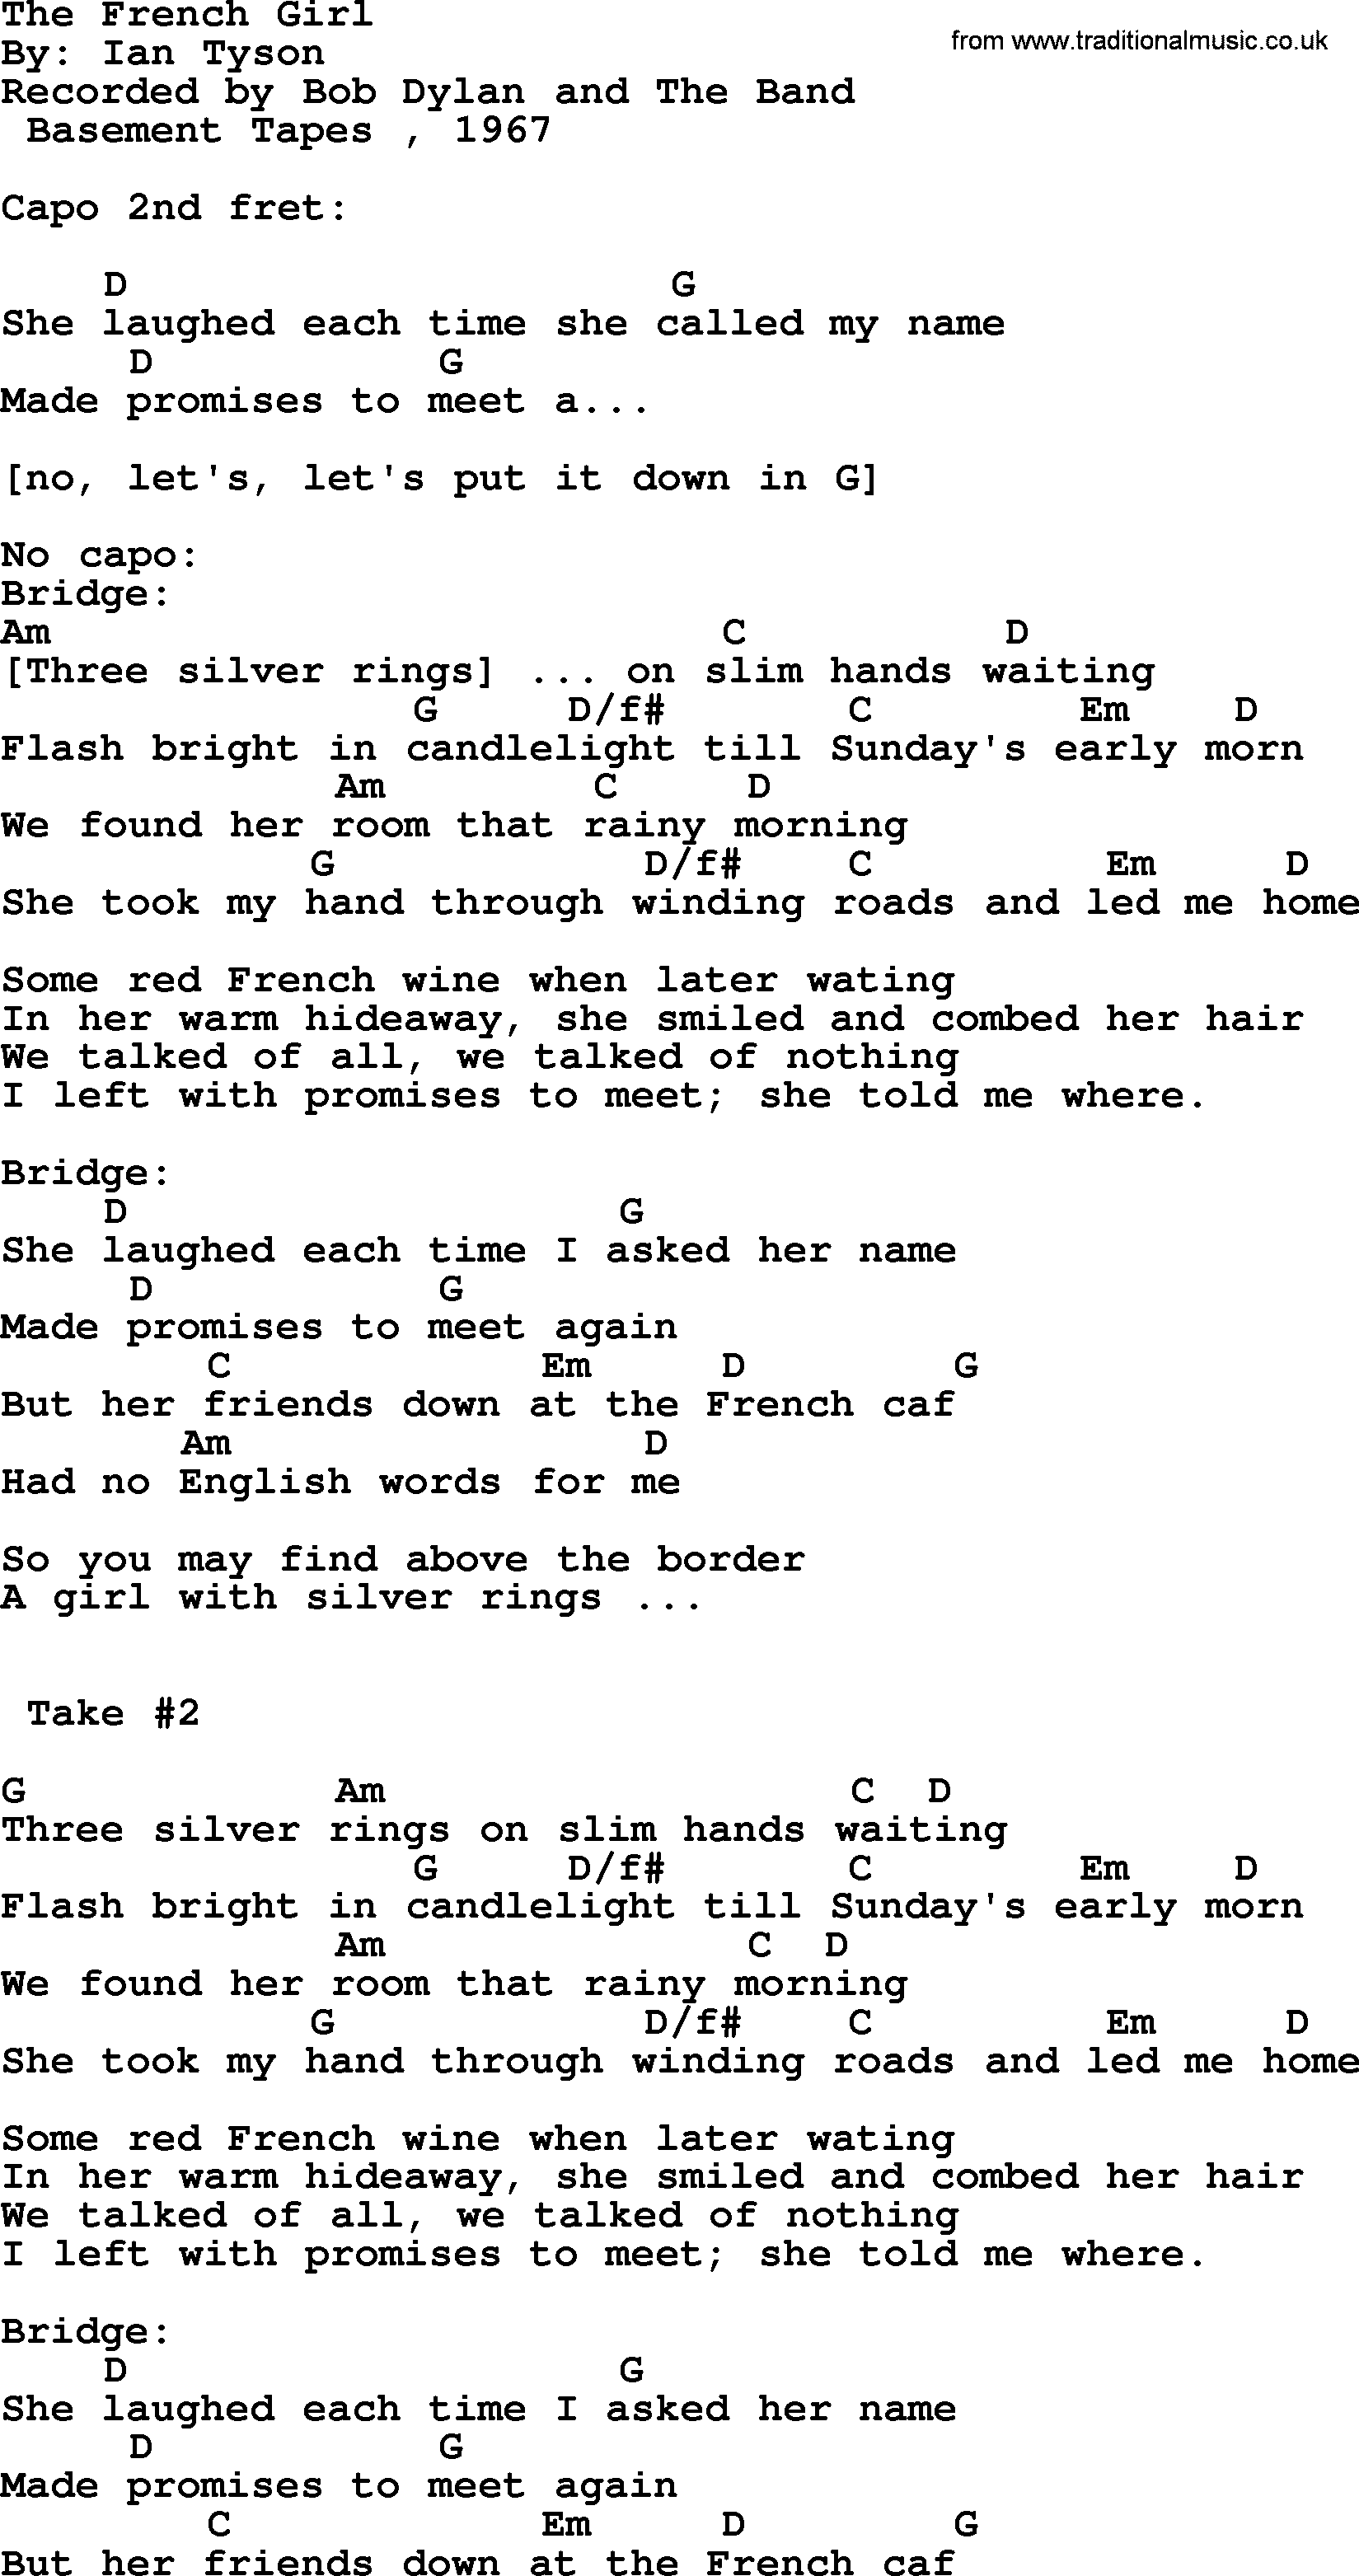 Bob Dylan song, lyrics with chords - The French Girl